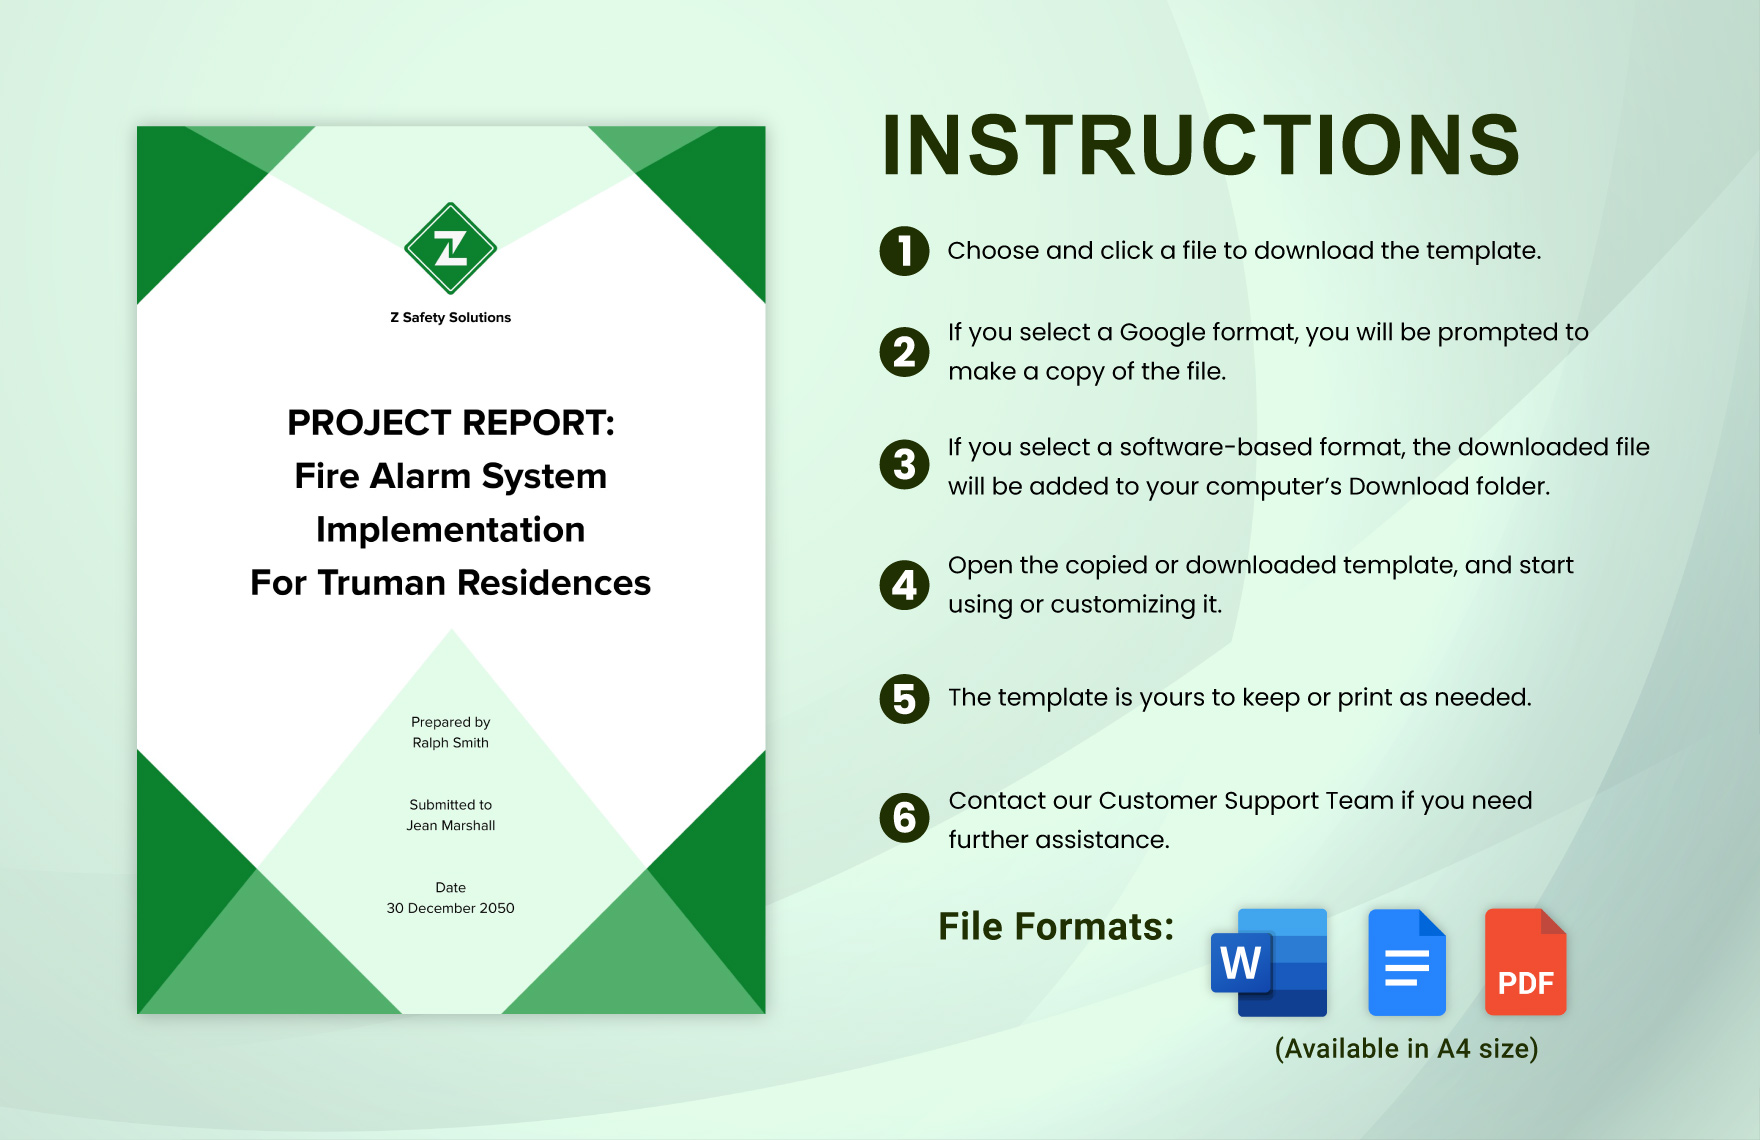 Fire Alarm Project Report Template